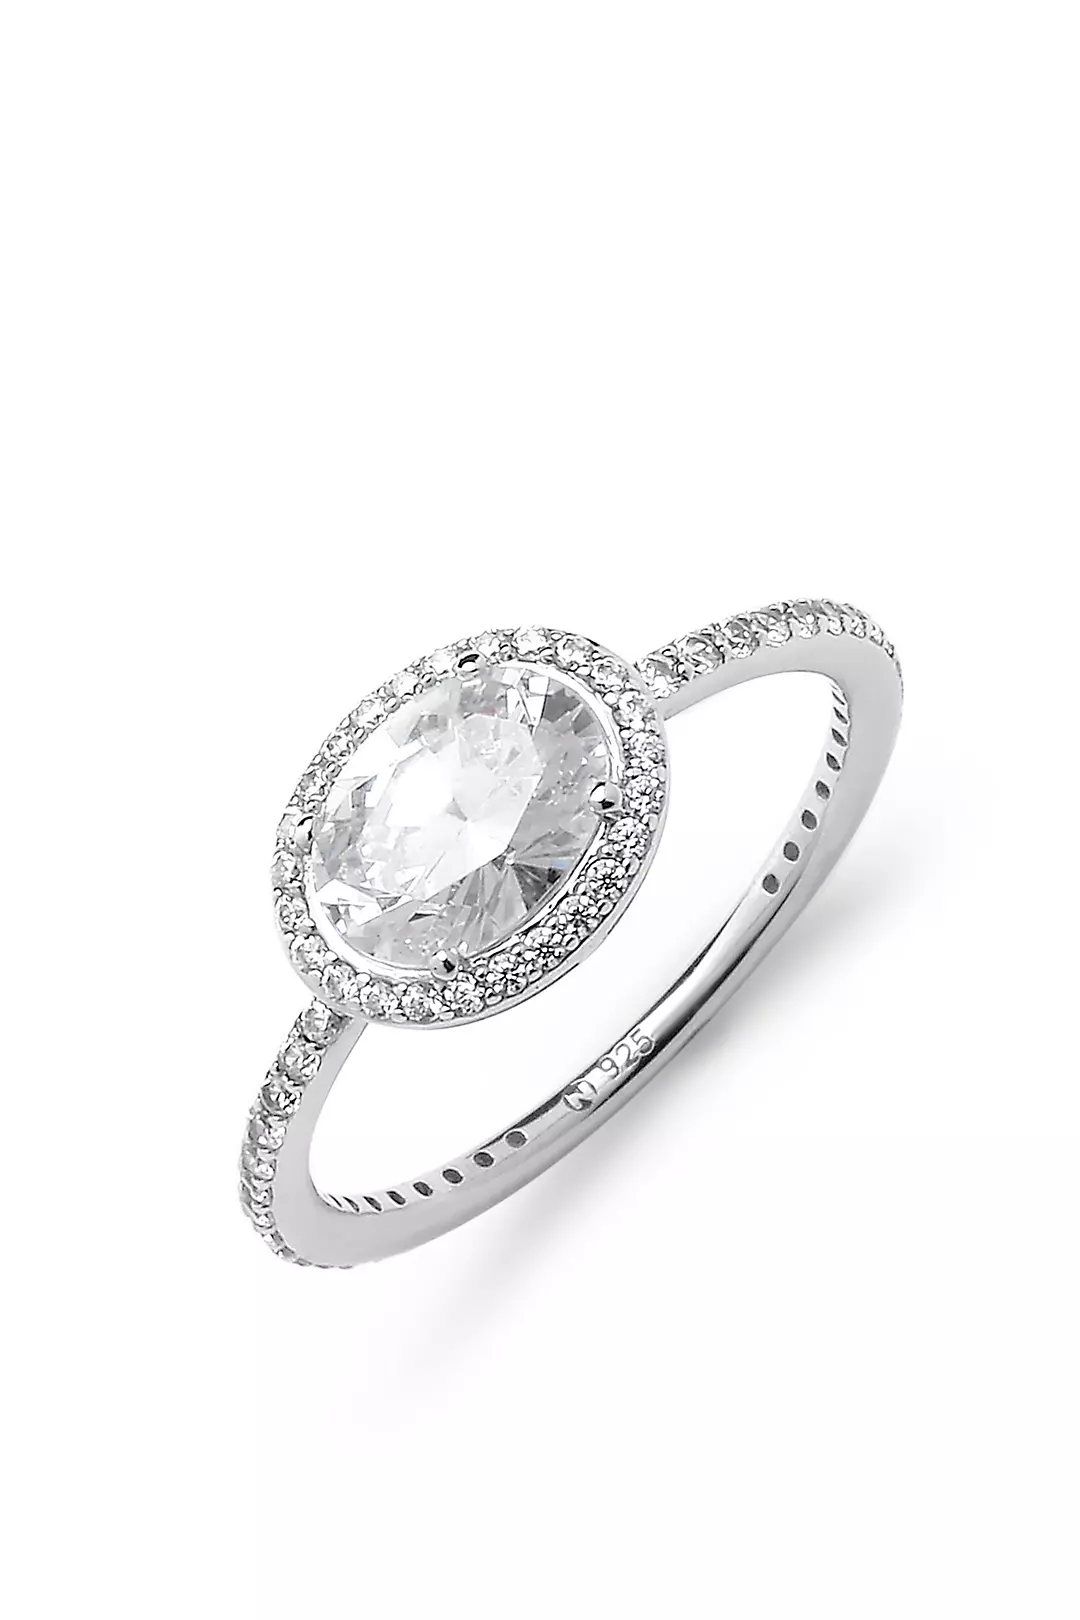 Haloed Oval Cubic Zirconia Sterling Silver Ring Image